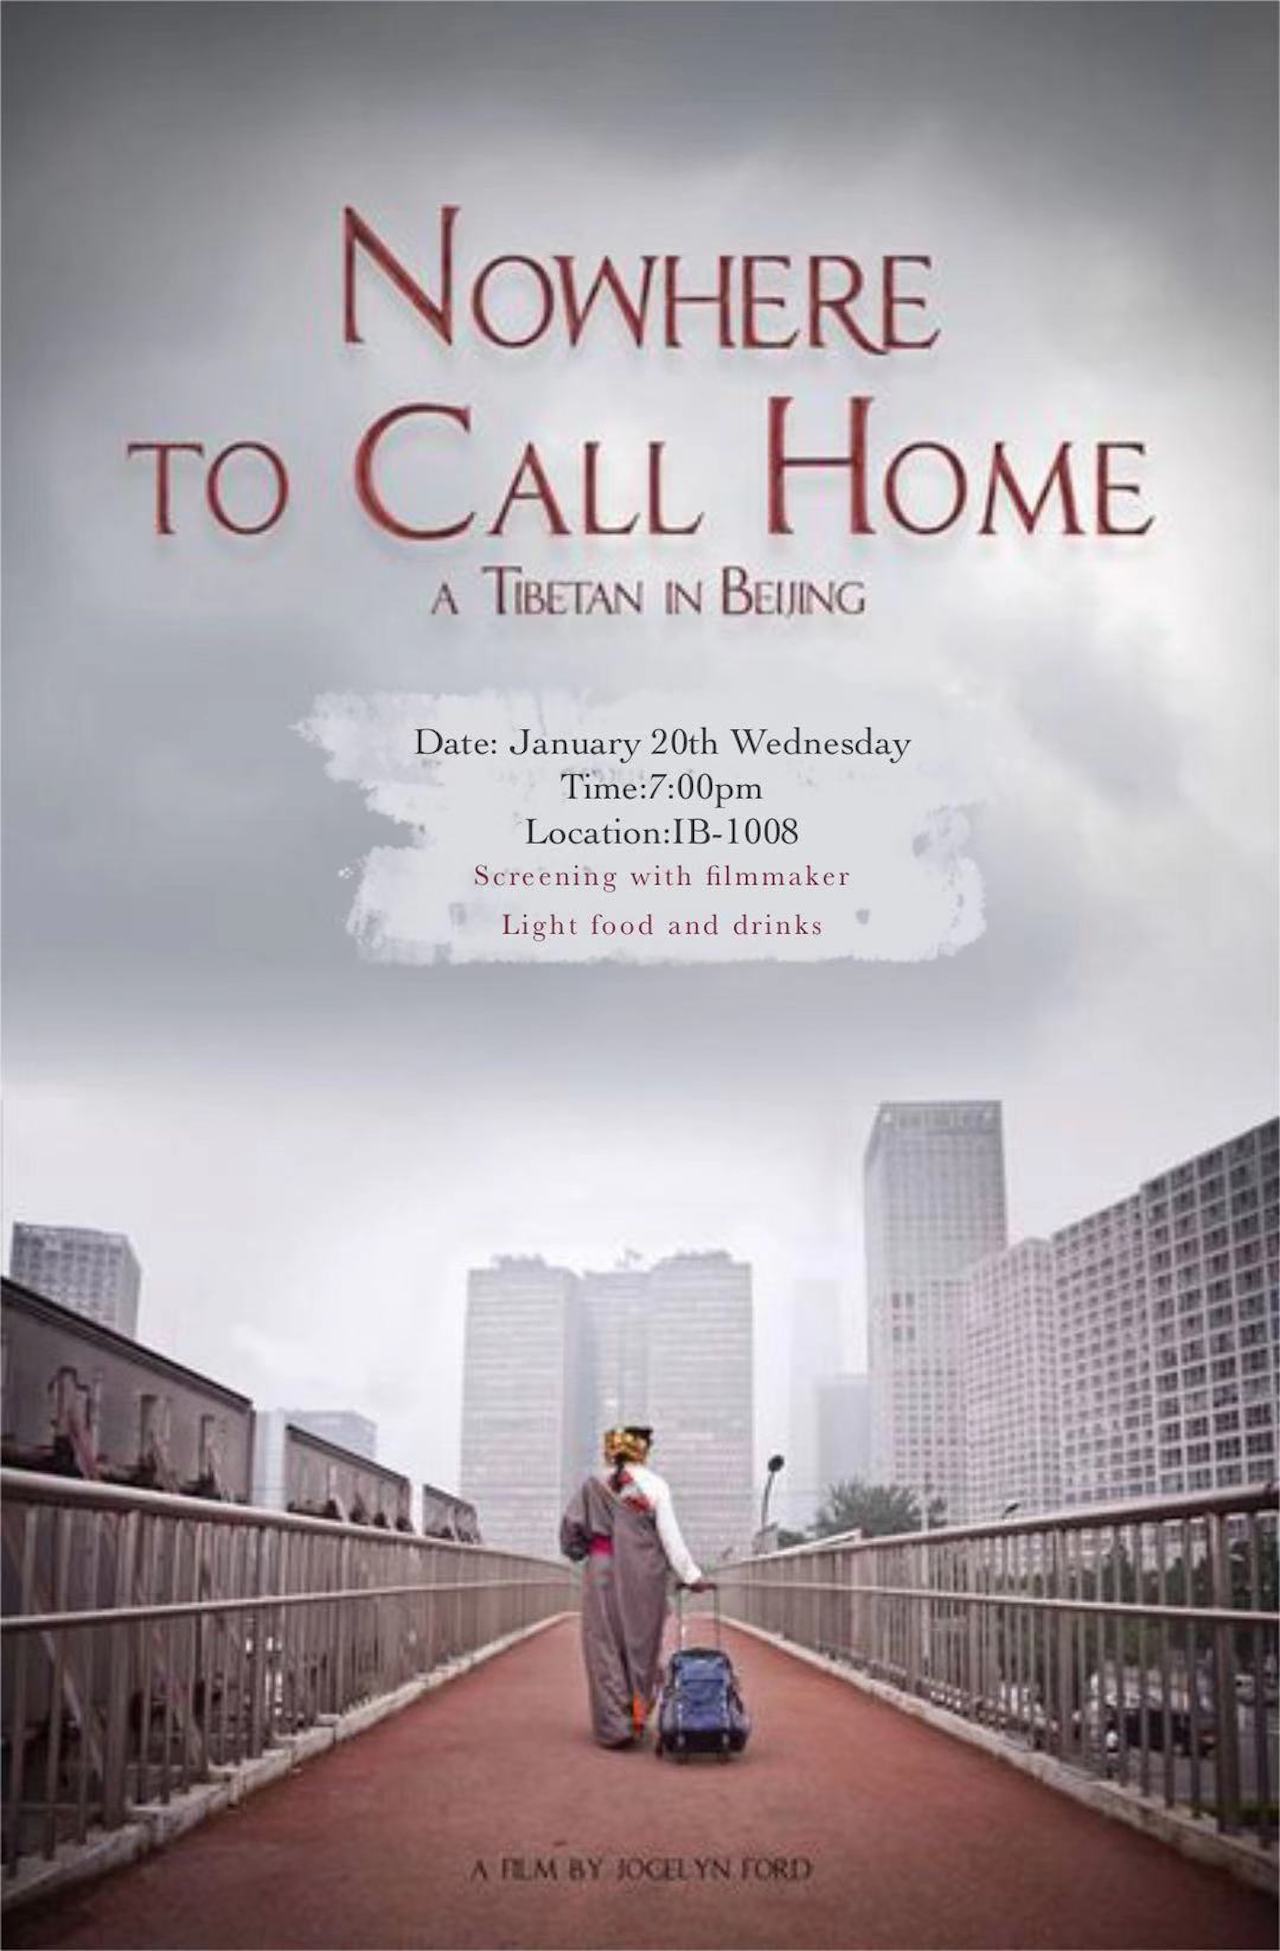 Film screening with filmmaker: Nowhere to call home